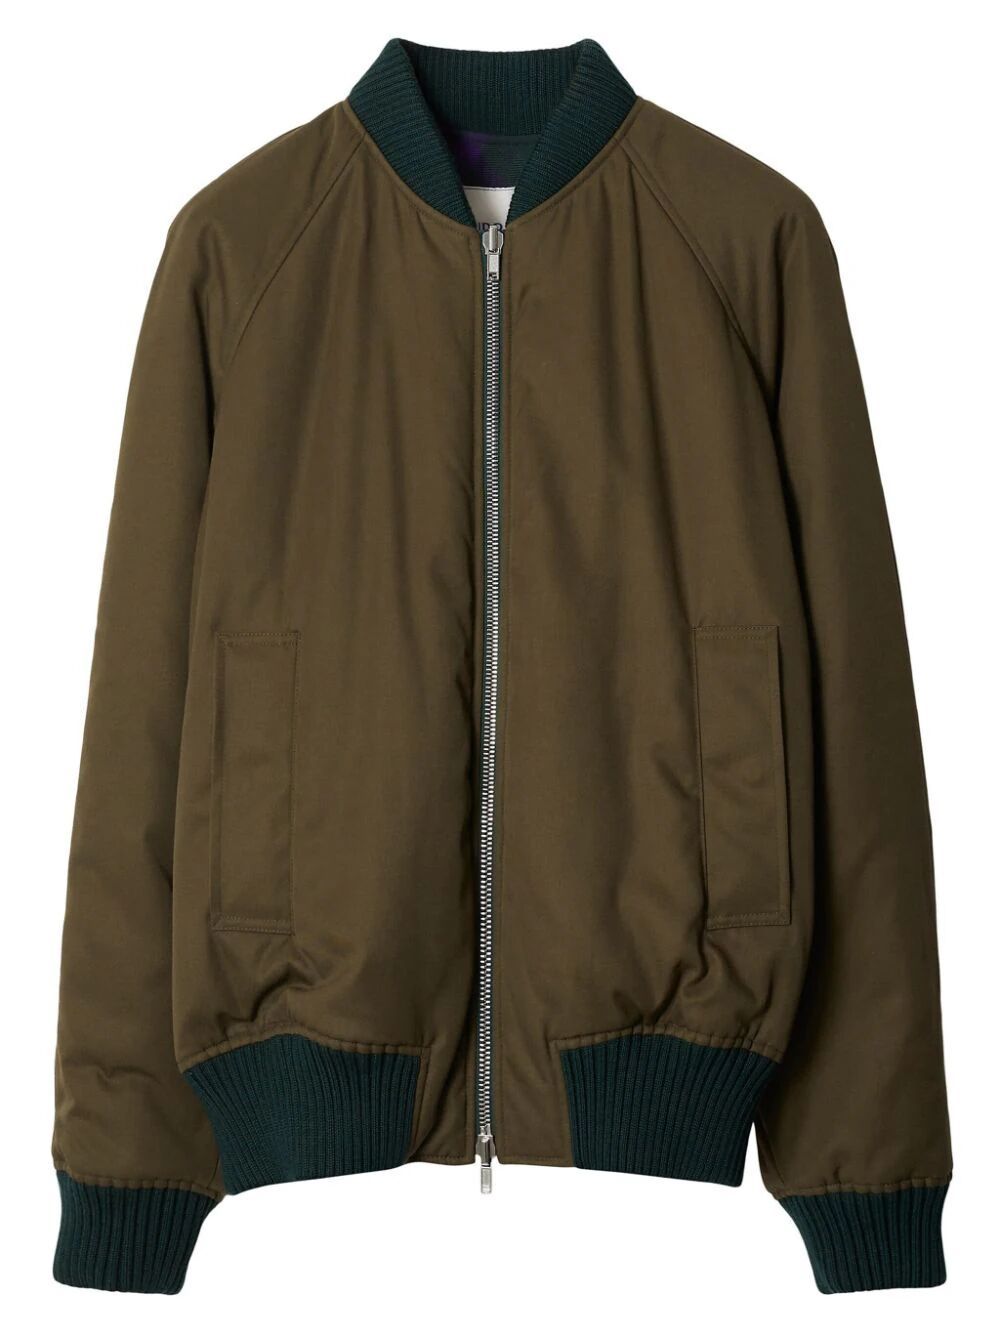 BURBERRY Luxurious Reversible Bomber Jacket for the New Season